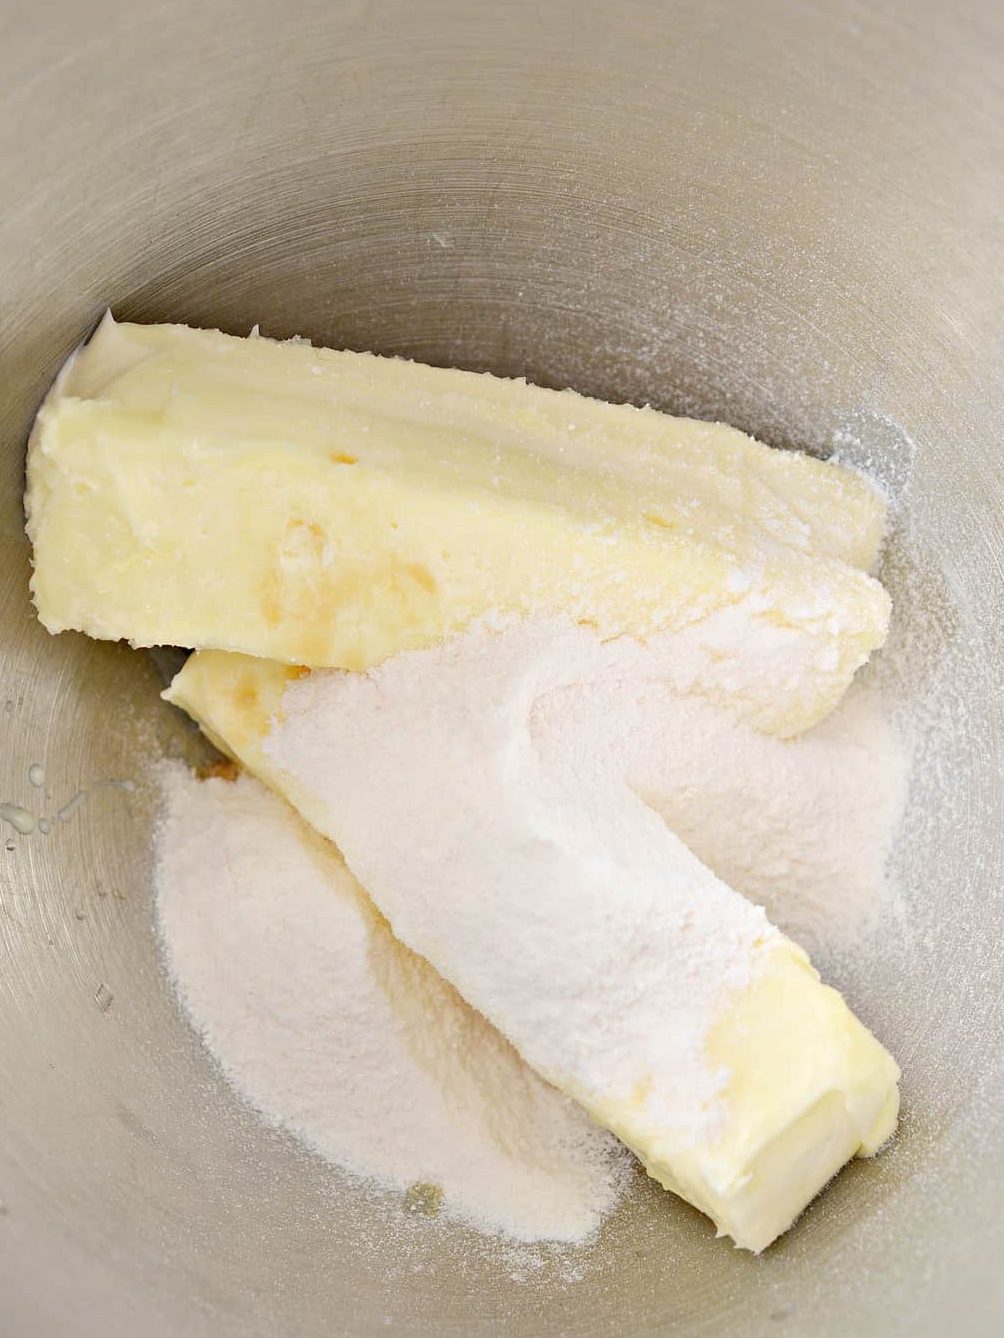 Mix together the 2 sticks of butter and the cheesecake pudding mix together until creamy.